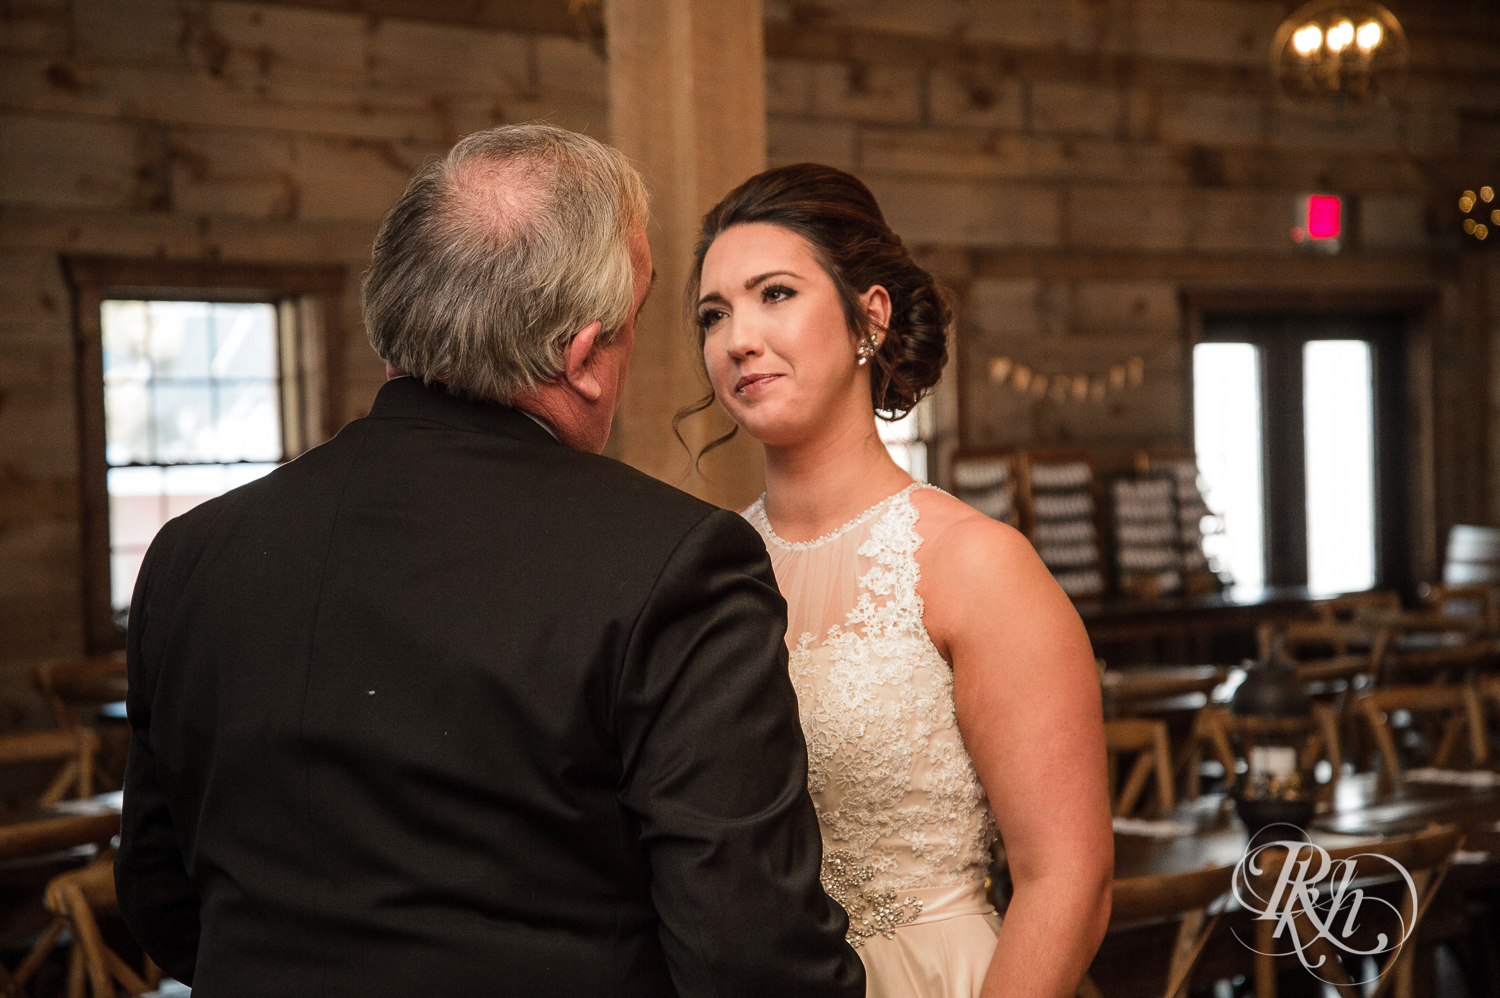 Bride does first look with her dad before wedding at Creekside Farm in Rush City, Minnesota.